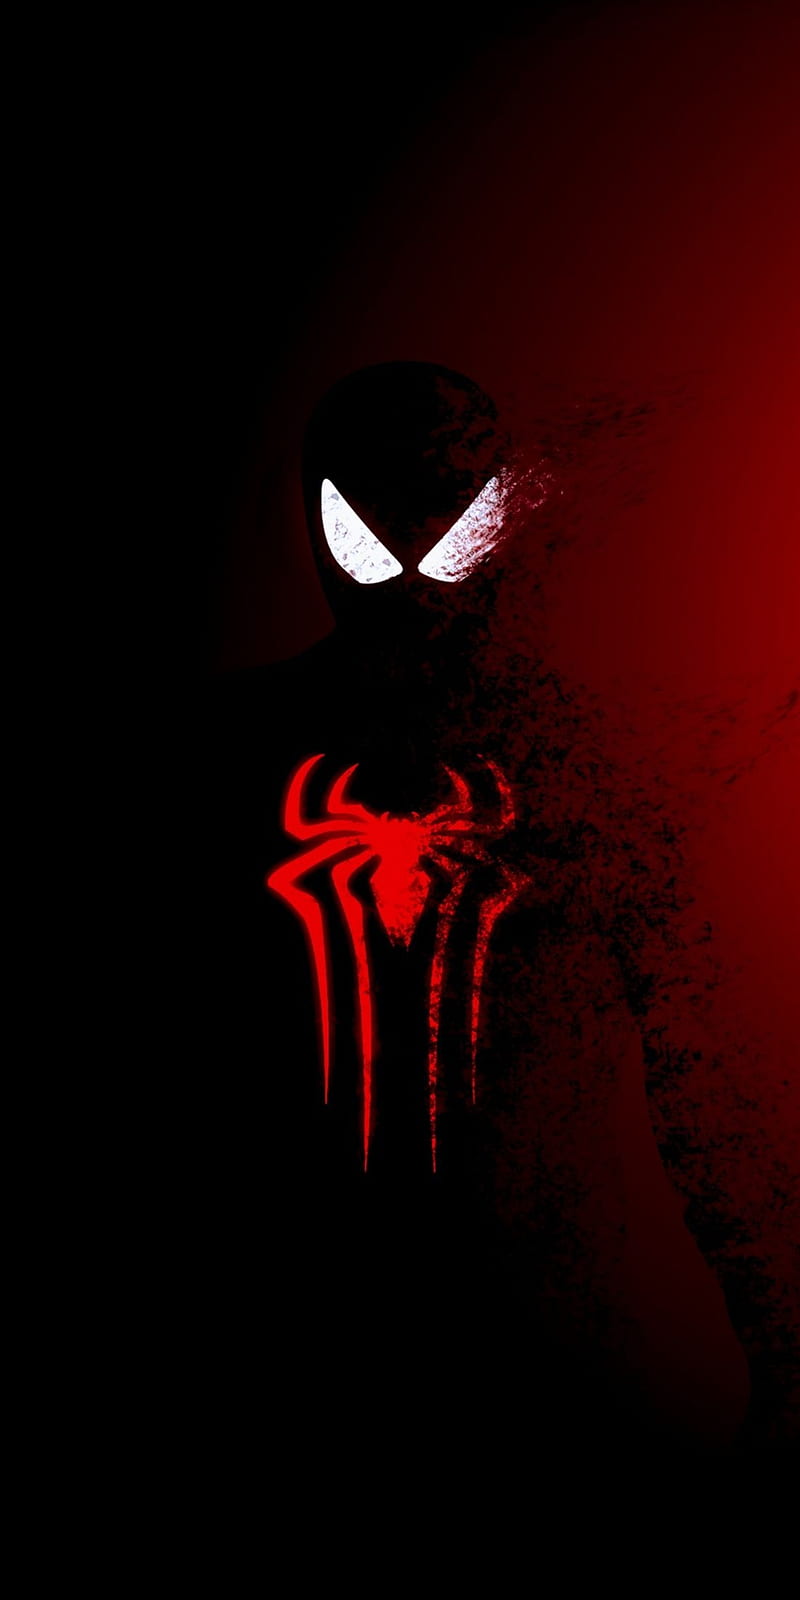 1920x1080px, 1080P free download | Spidey, itsv, miles morales, spider ...